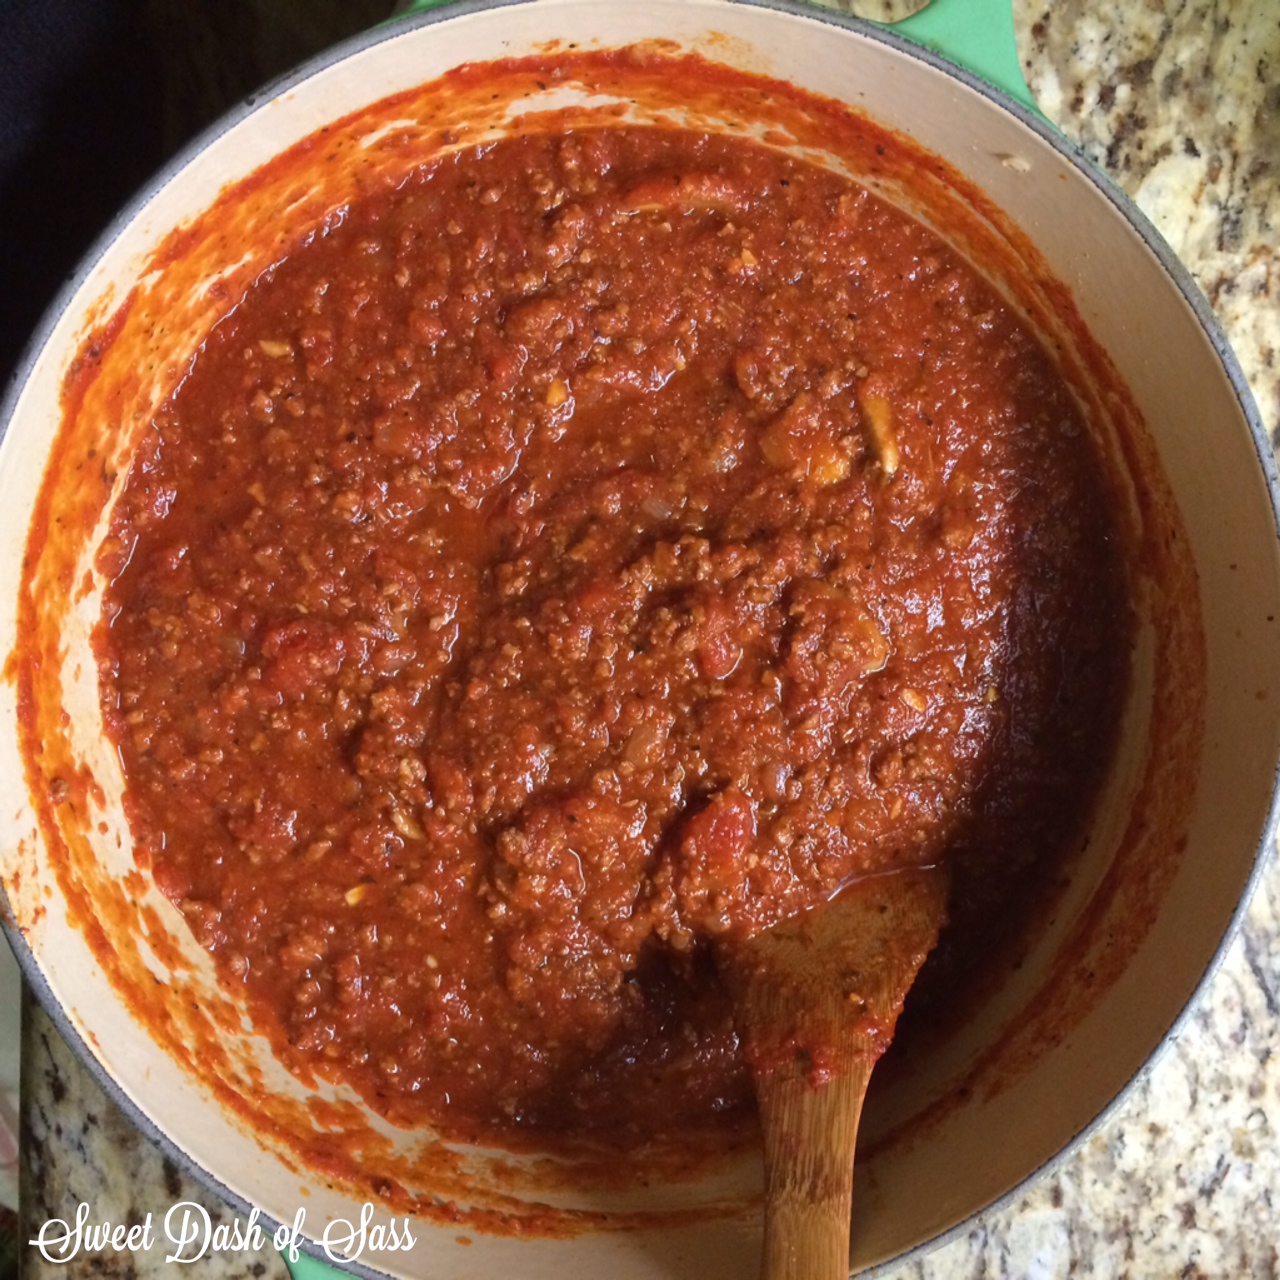 Best Tasting Homemade Spaghetti Sauce - Seriously best ever!  Will make this again!  www.SweetDashofSass.com